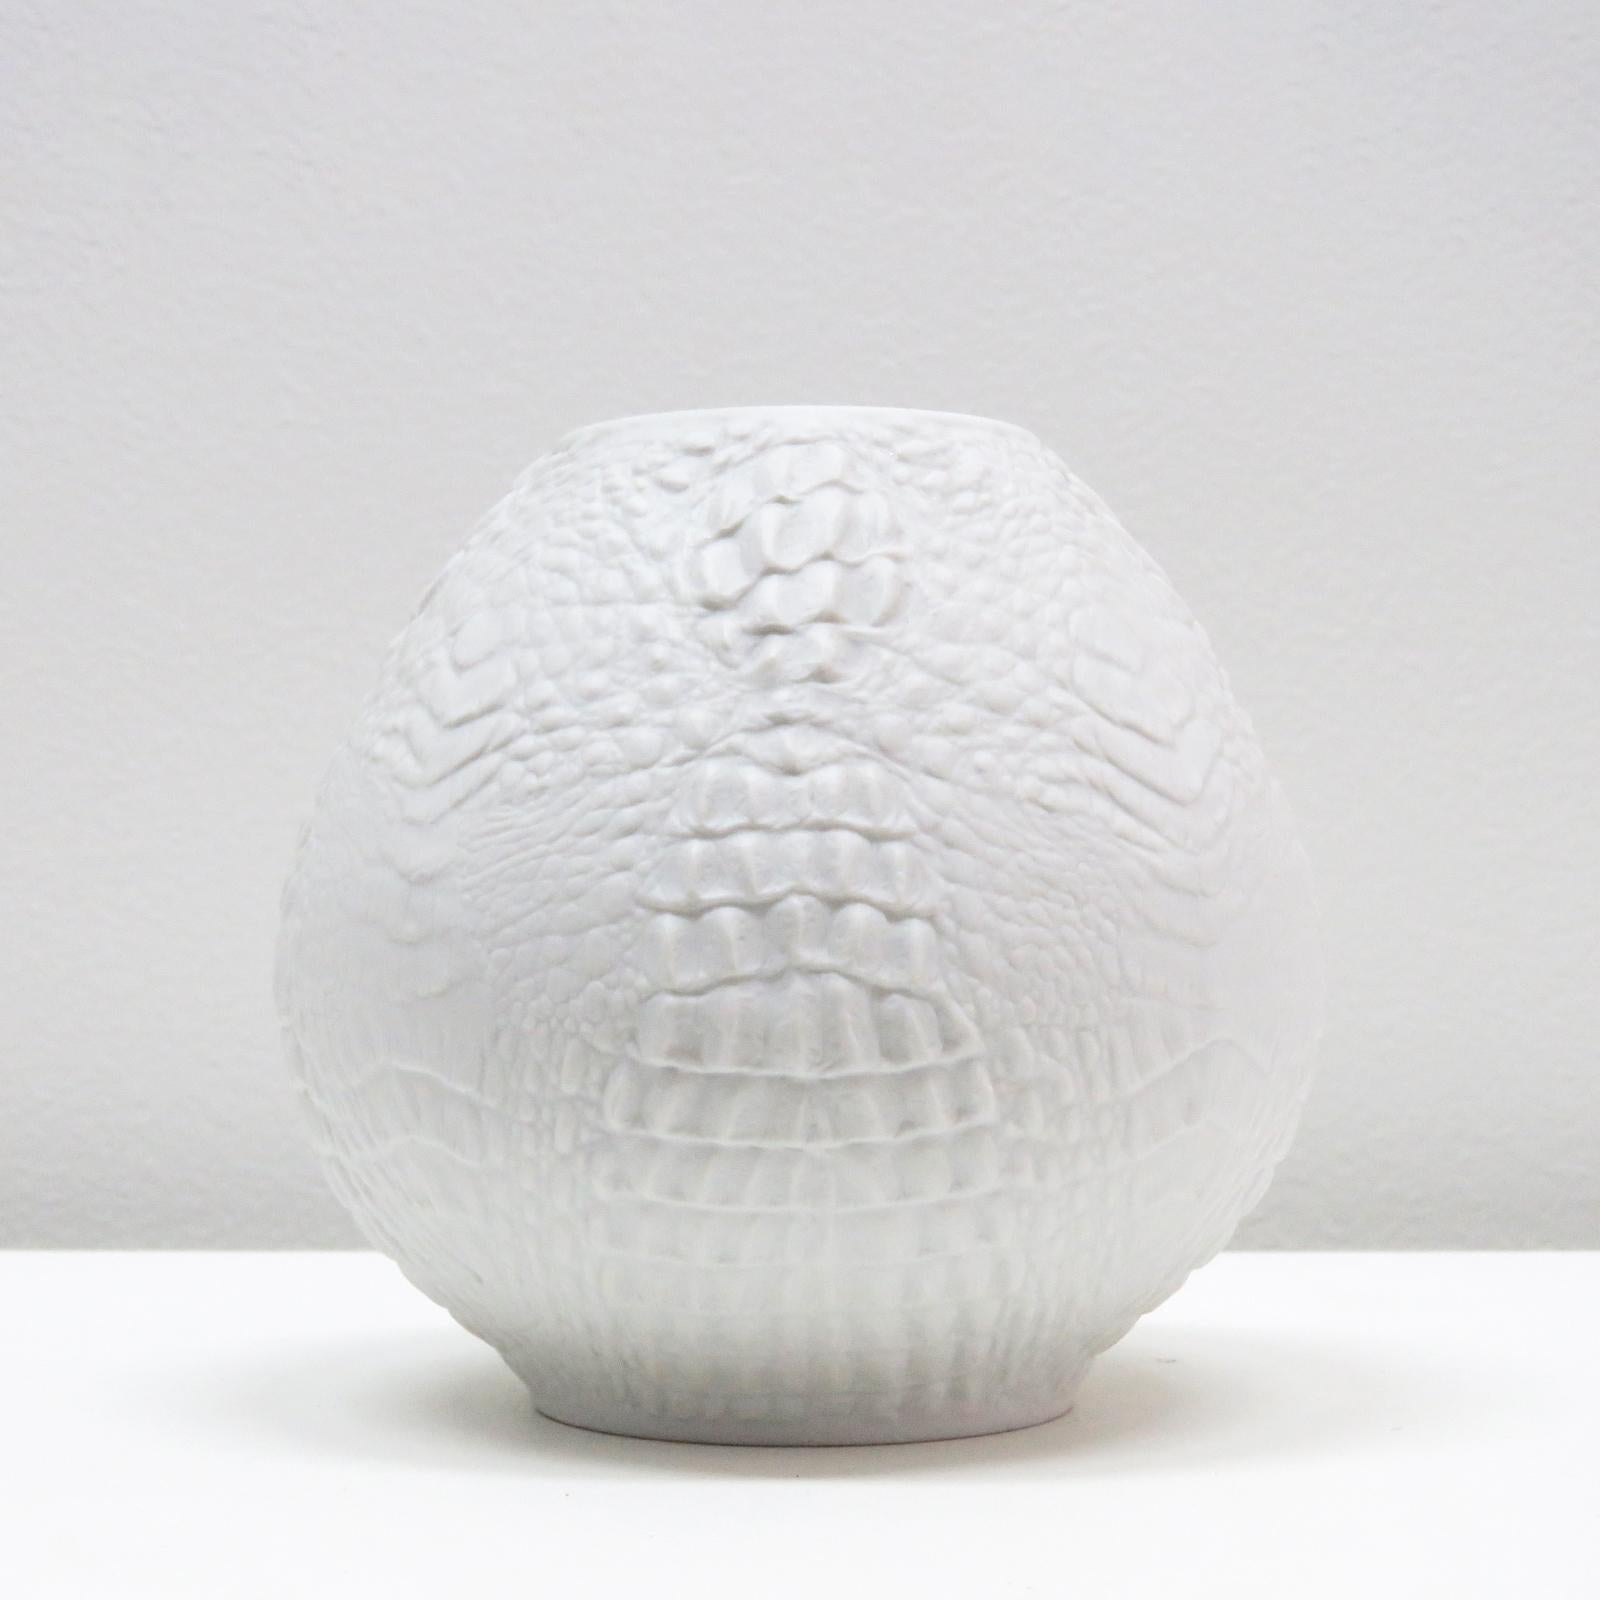 wonderful bisque Op-Art porcelain vase by Kaiser Keramik Germany, 1960, with a reptilian relief, model no. 246 (spherical version).